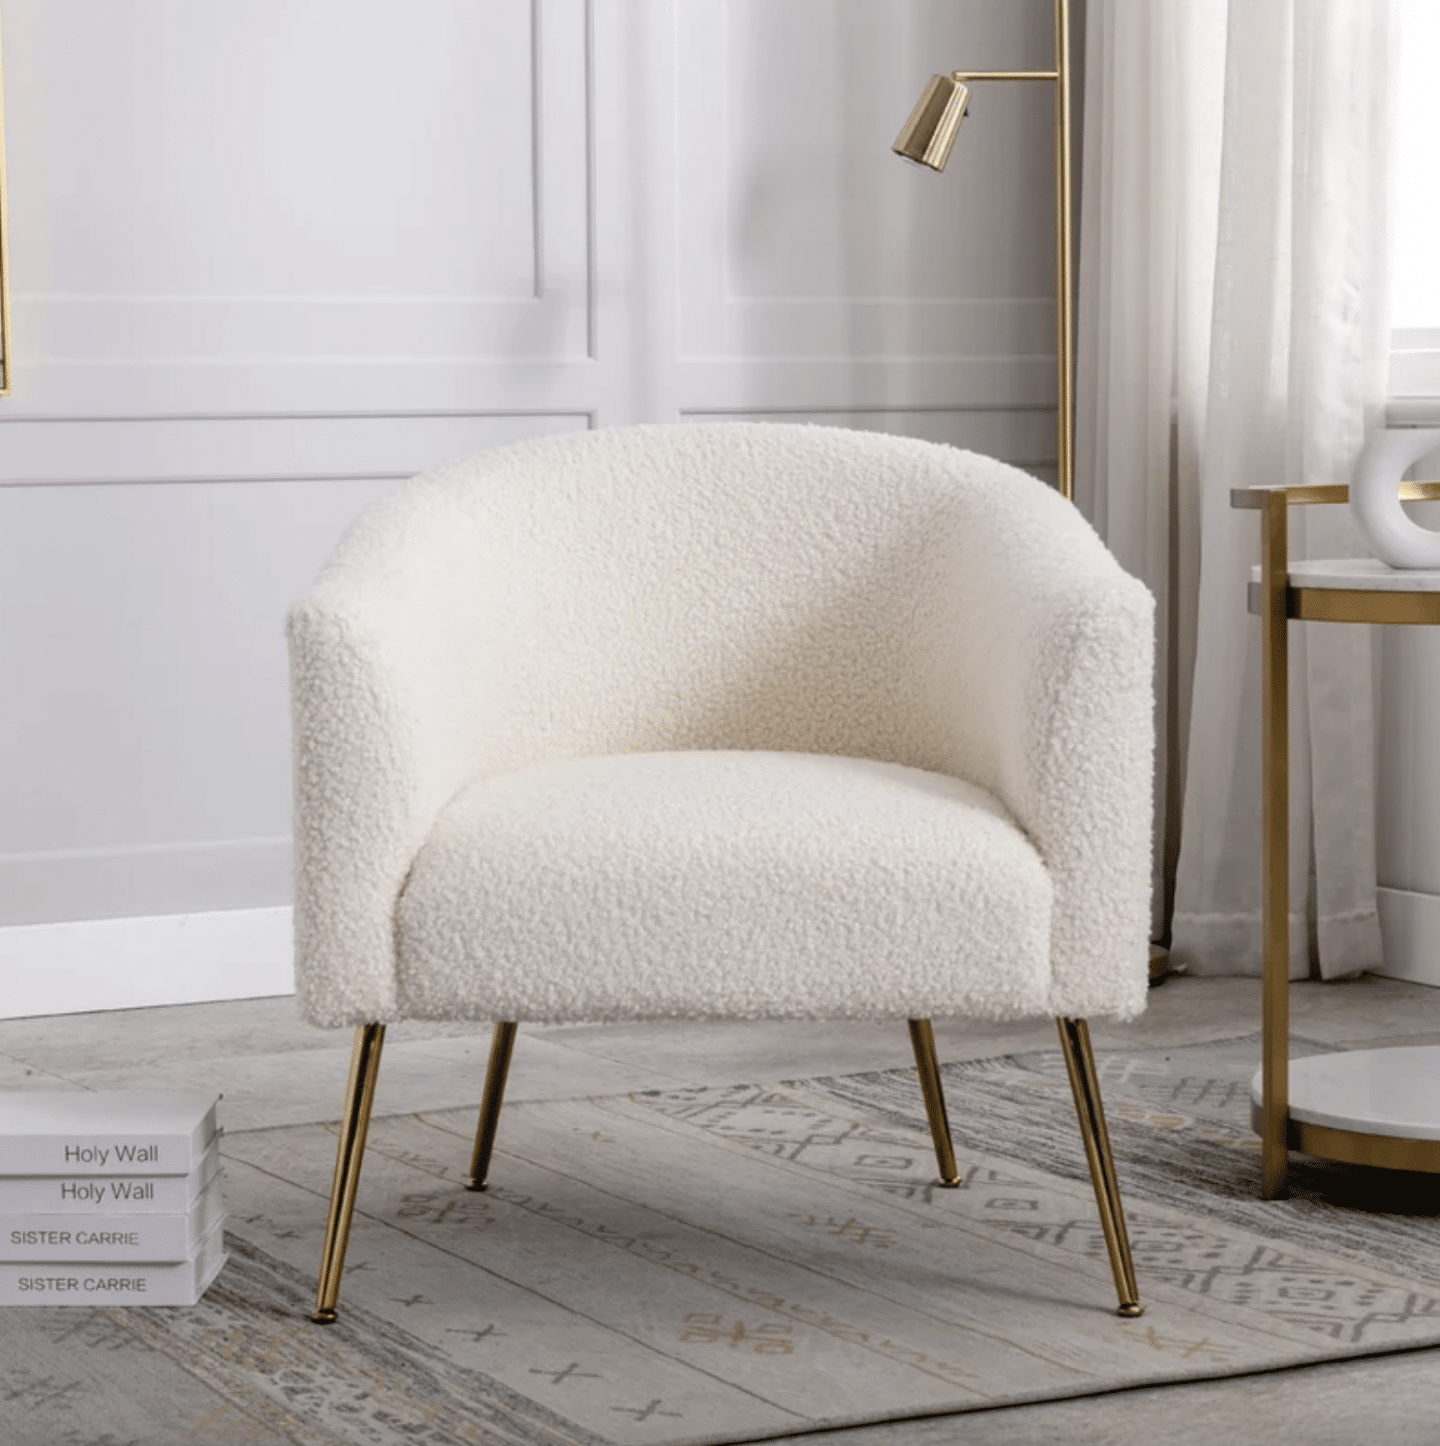 Sherpa Accent Chair, by Blogger What The Fab